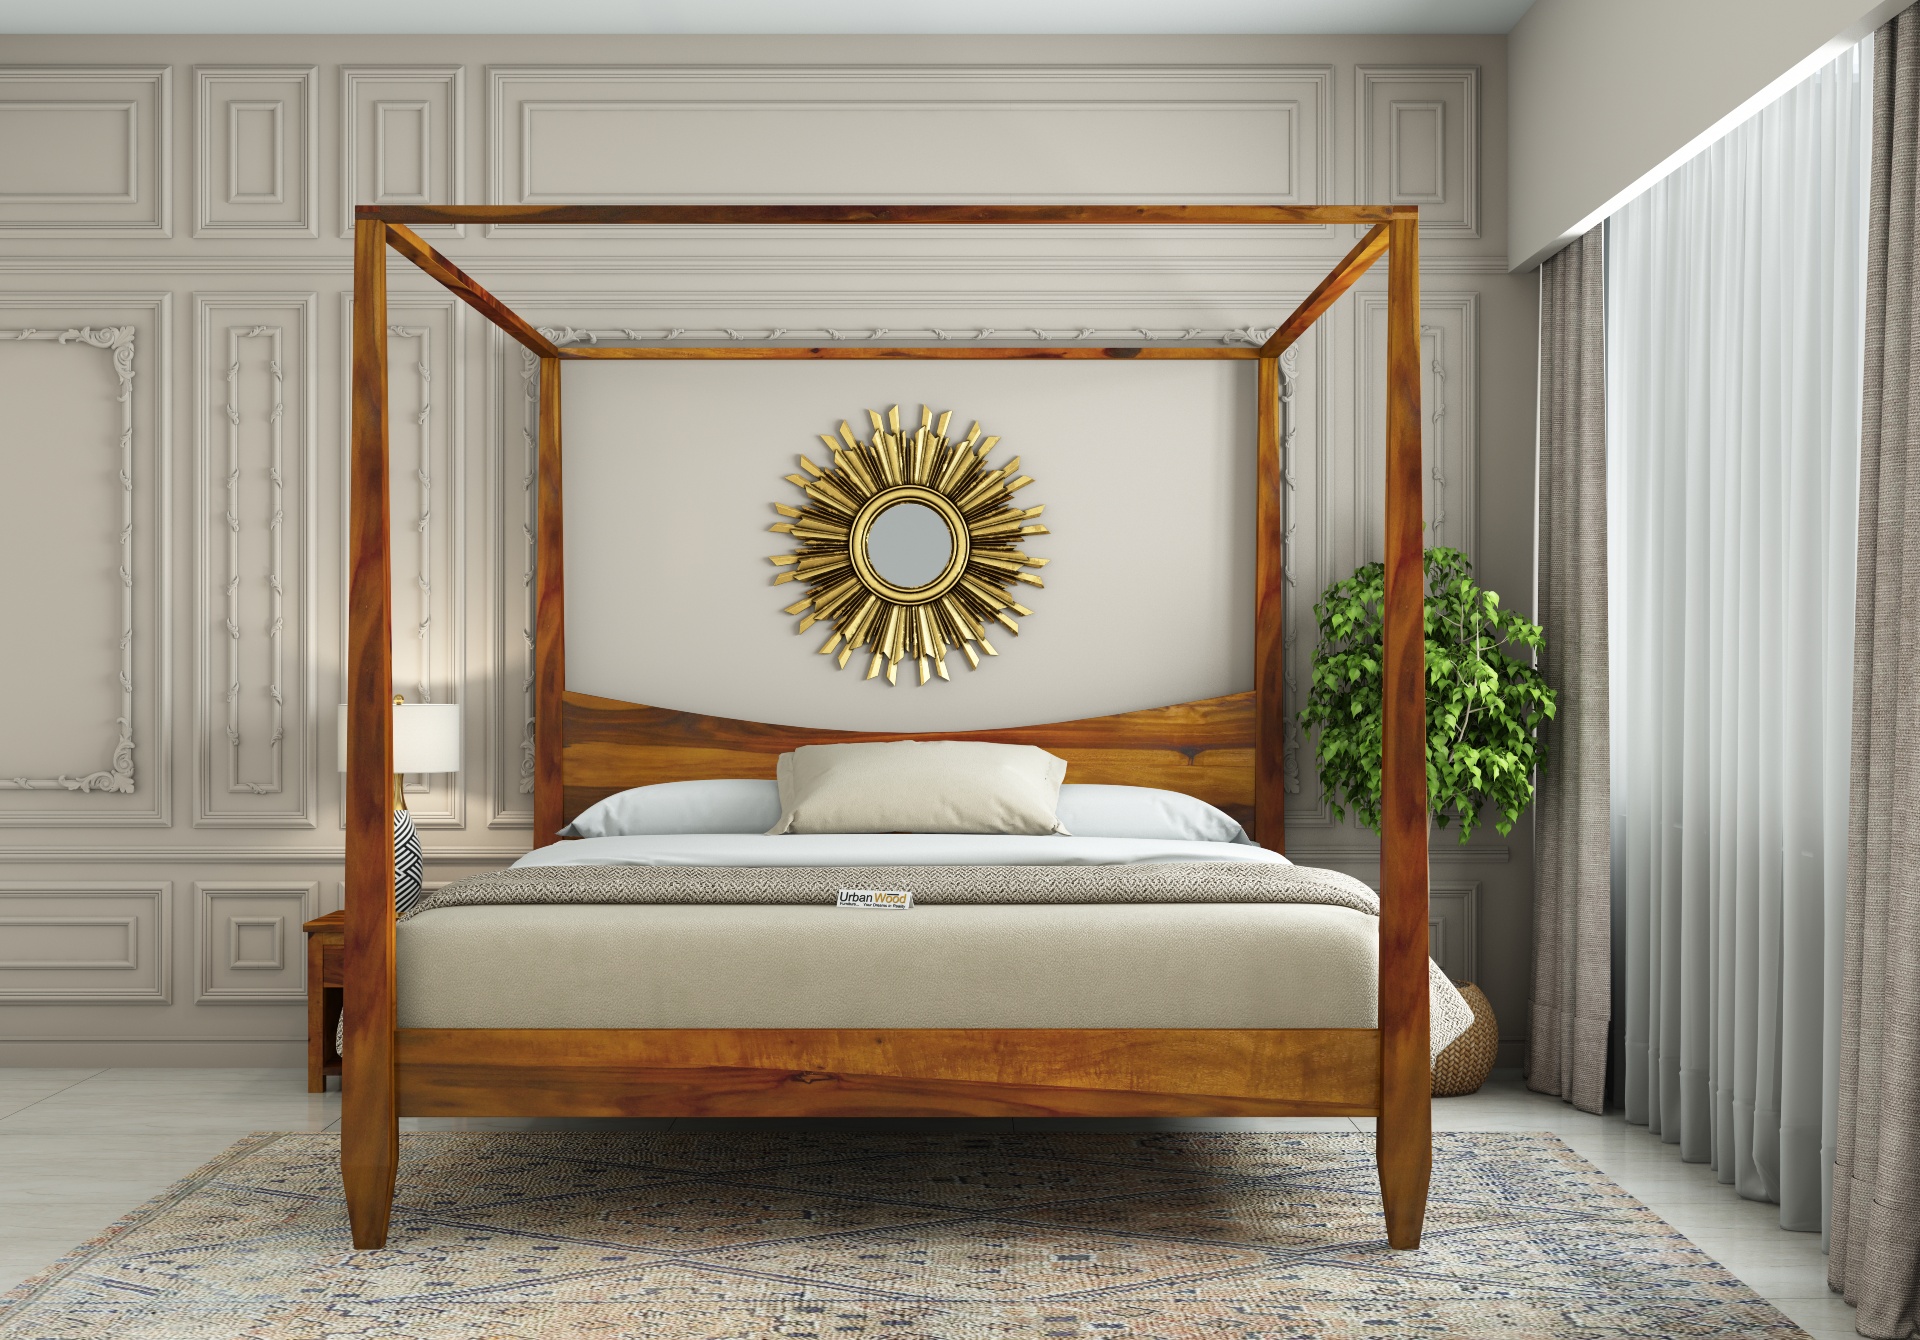 Flora Poster Bed (King Size, Honey Finish)